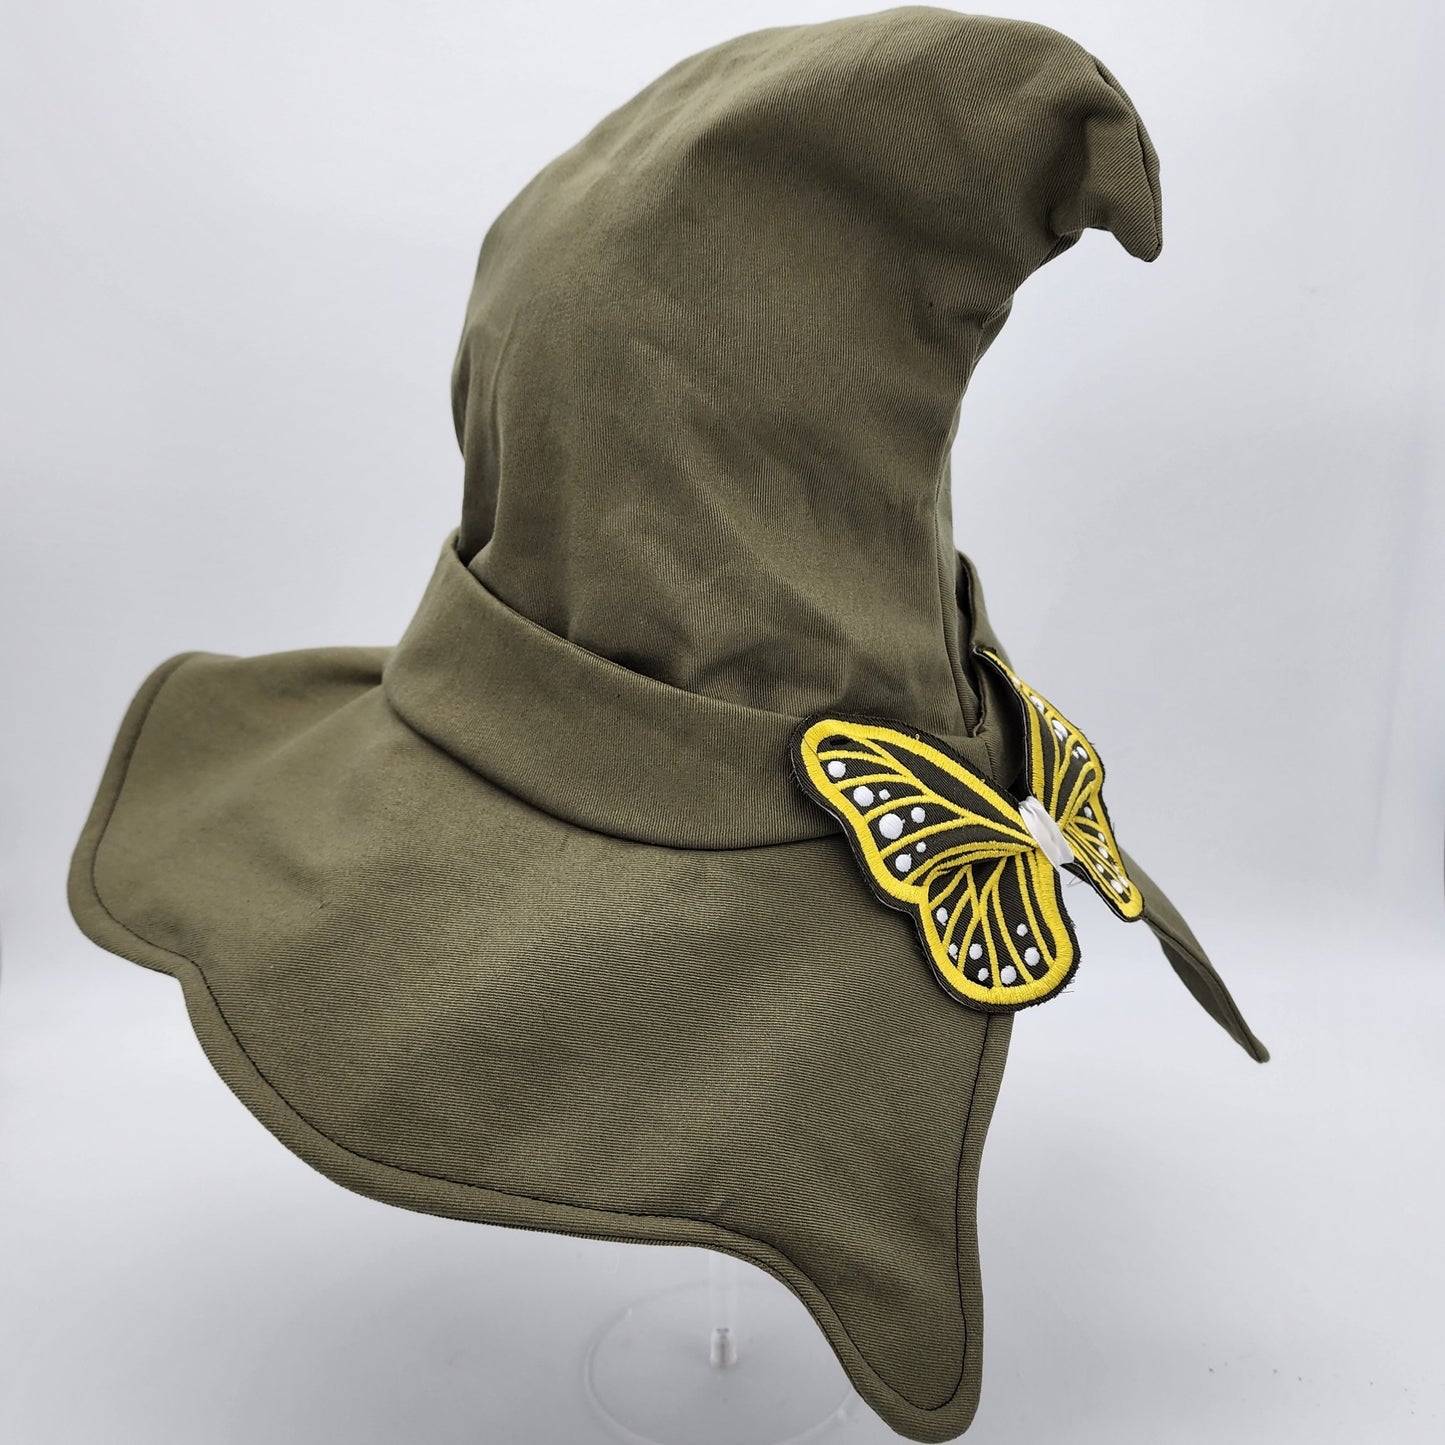 Butterfly Witch Hat- Olive Green with Gold and White Embroidery